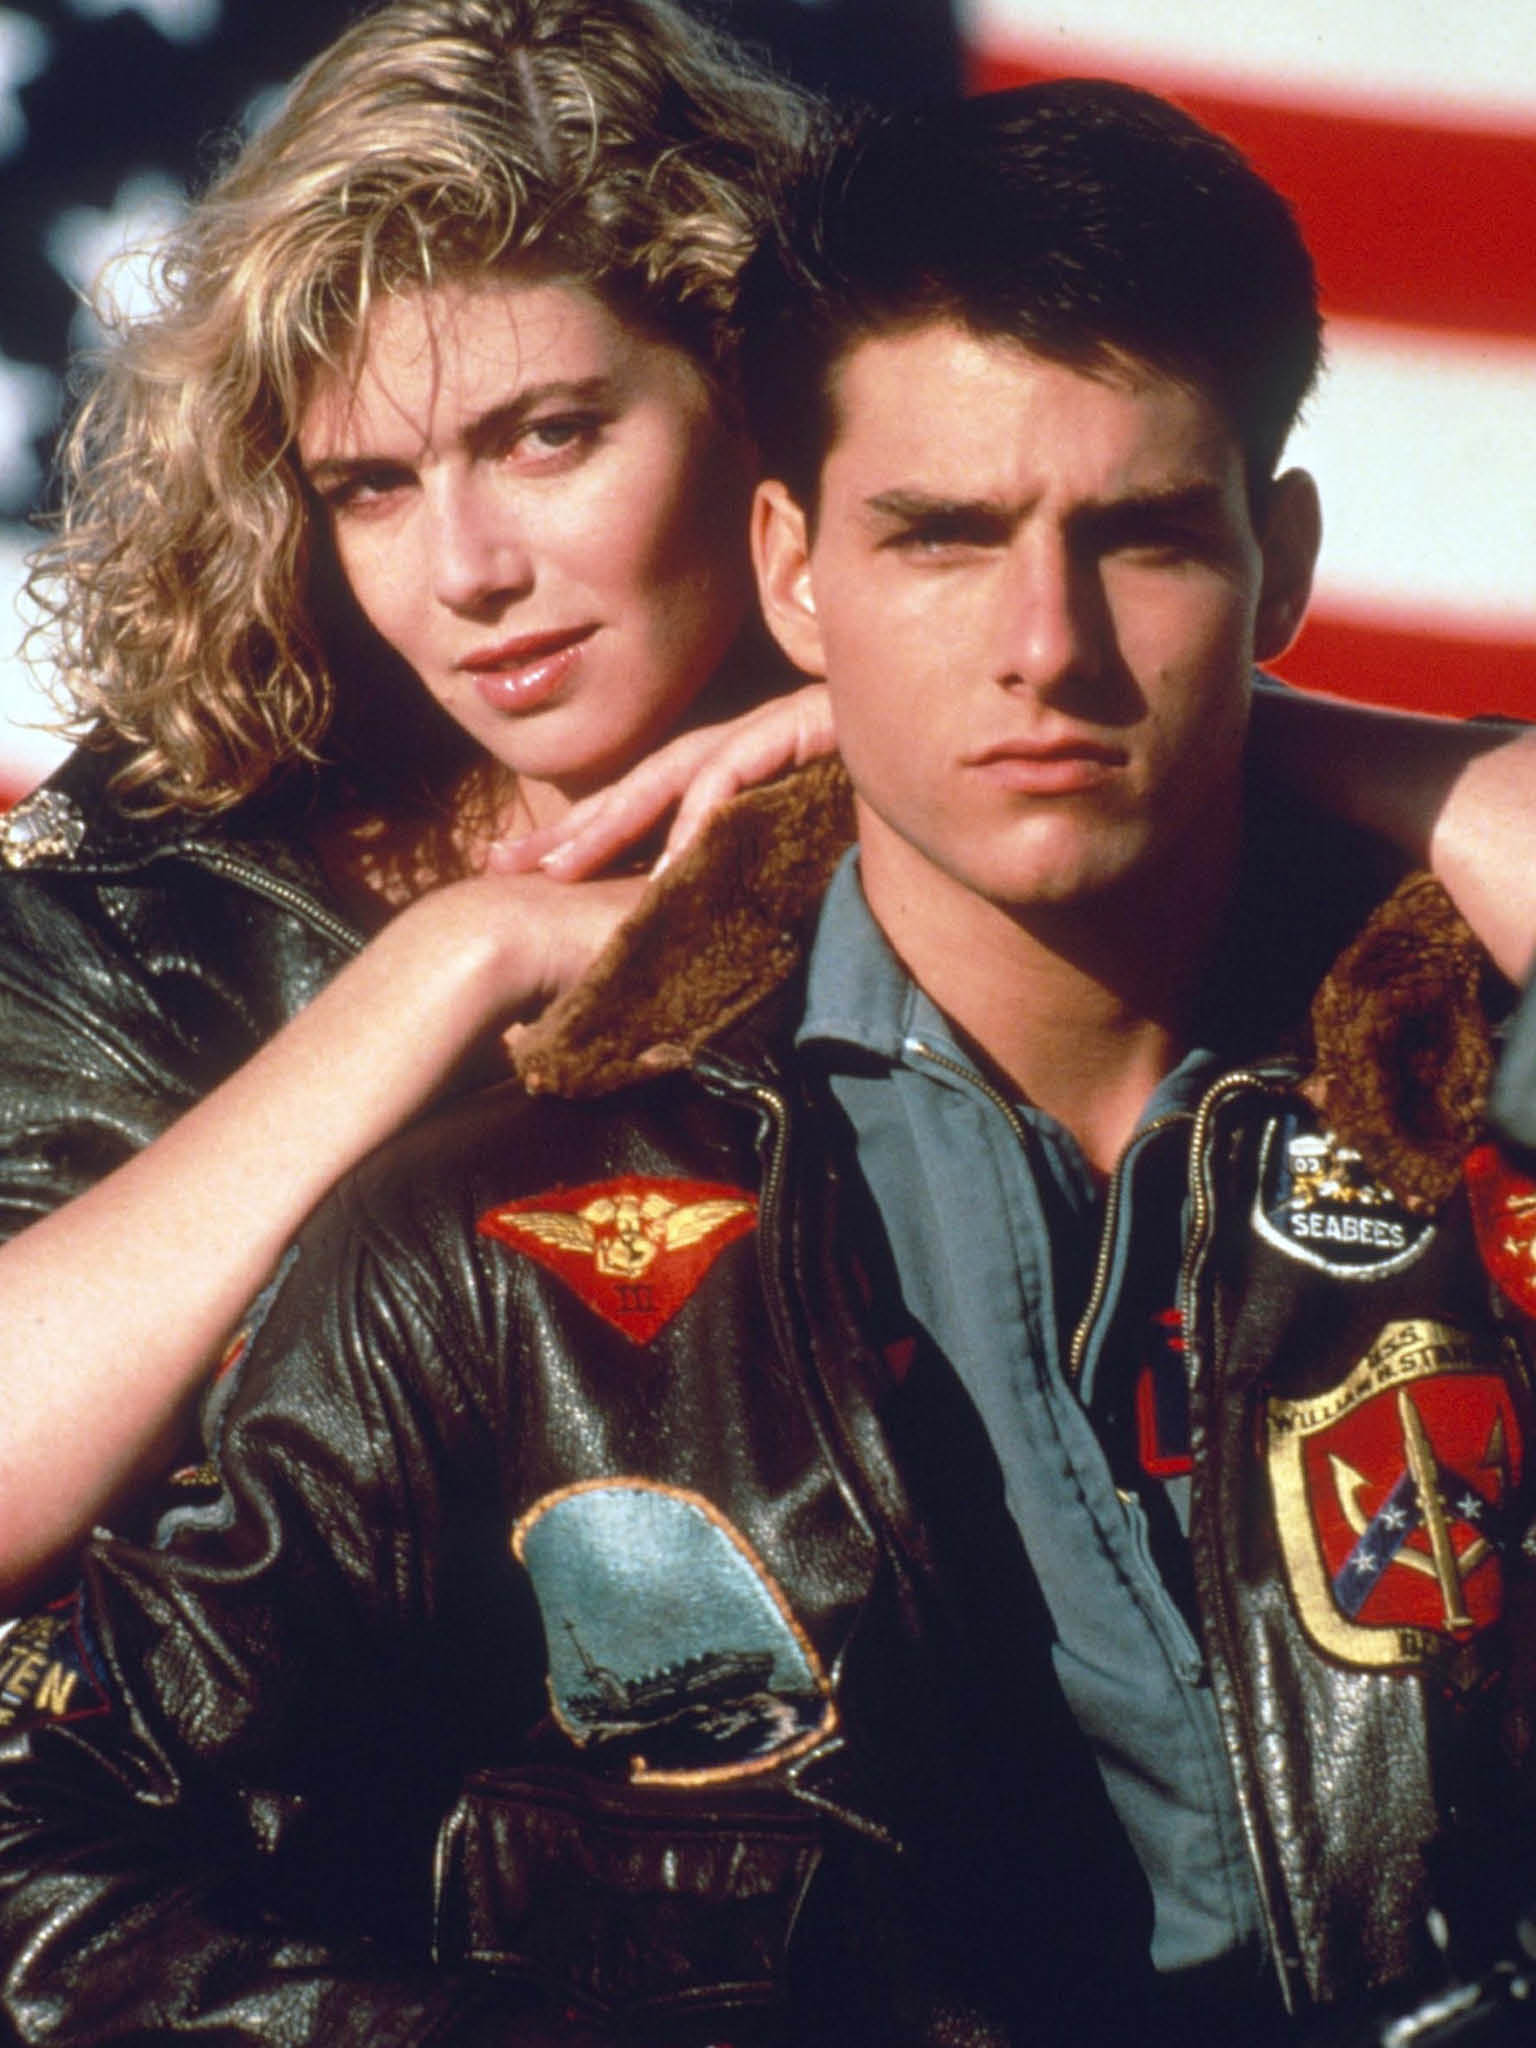 Mandatory Credit: Photo By Rex Features TOM CRUISE AND KELLY MCGILLIS IN  TOP GUN  FILM  TOP GUN  - 1986 (EDITORIAL USE ONLY) EDITORIAL USE ONLY